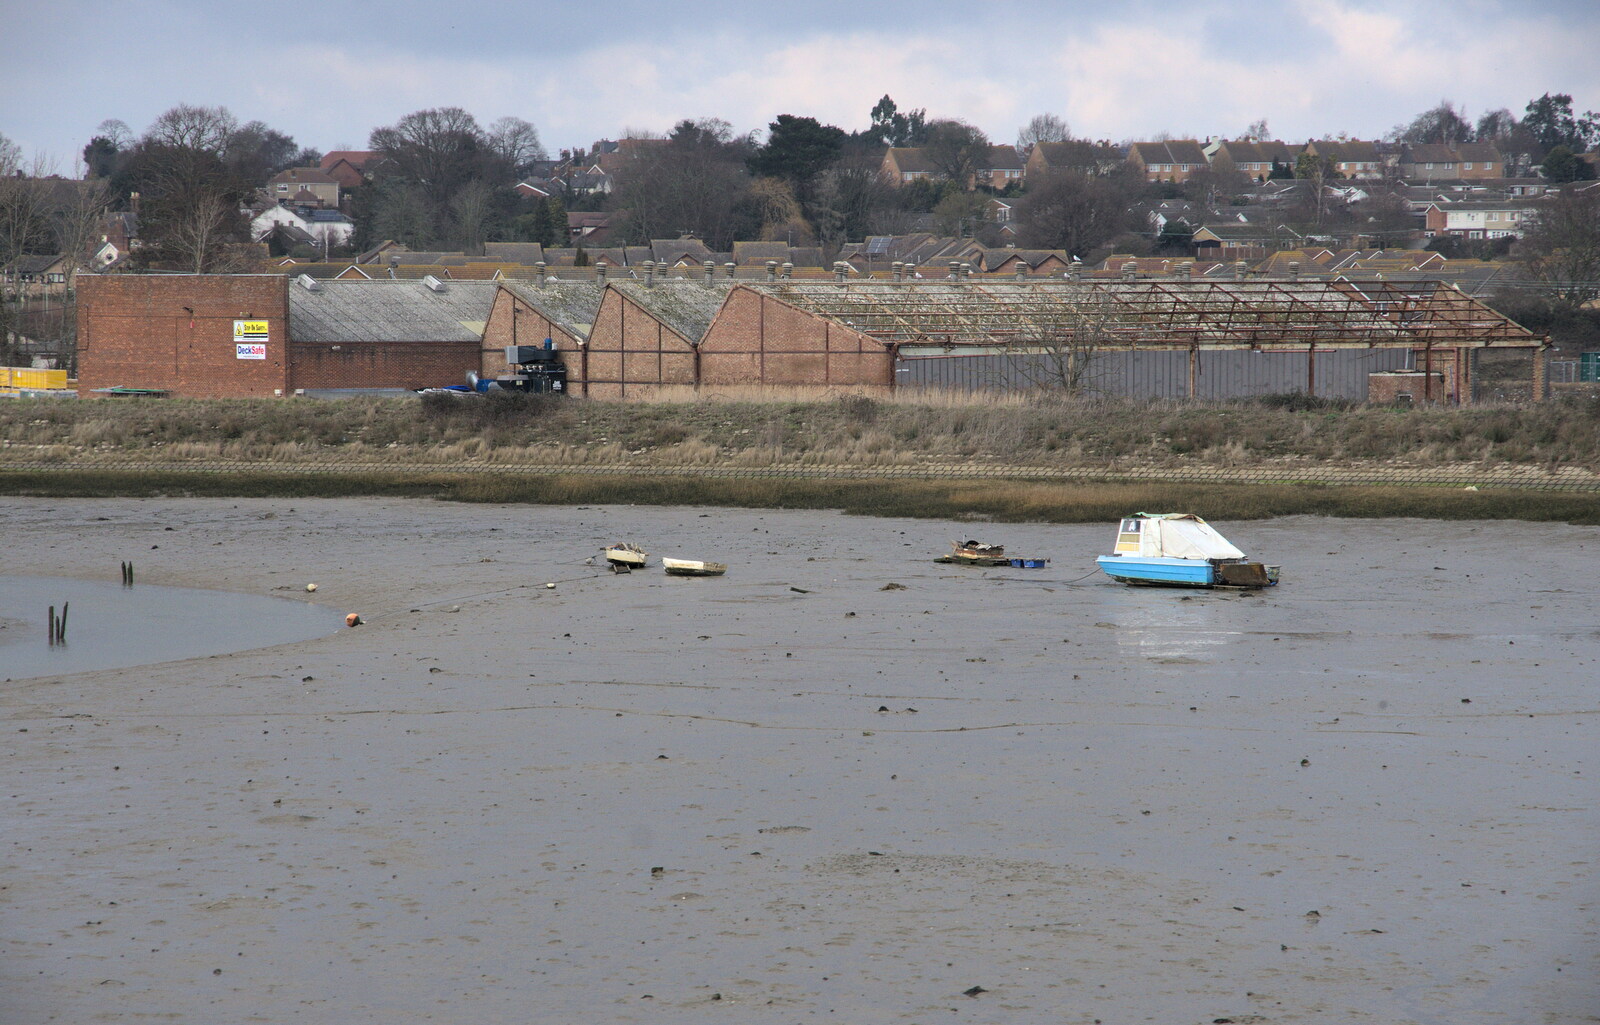 Boats on the mud from A Wintry Trip Down South, Walkford, Dorset - 1st February 2019